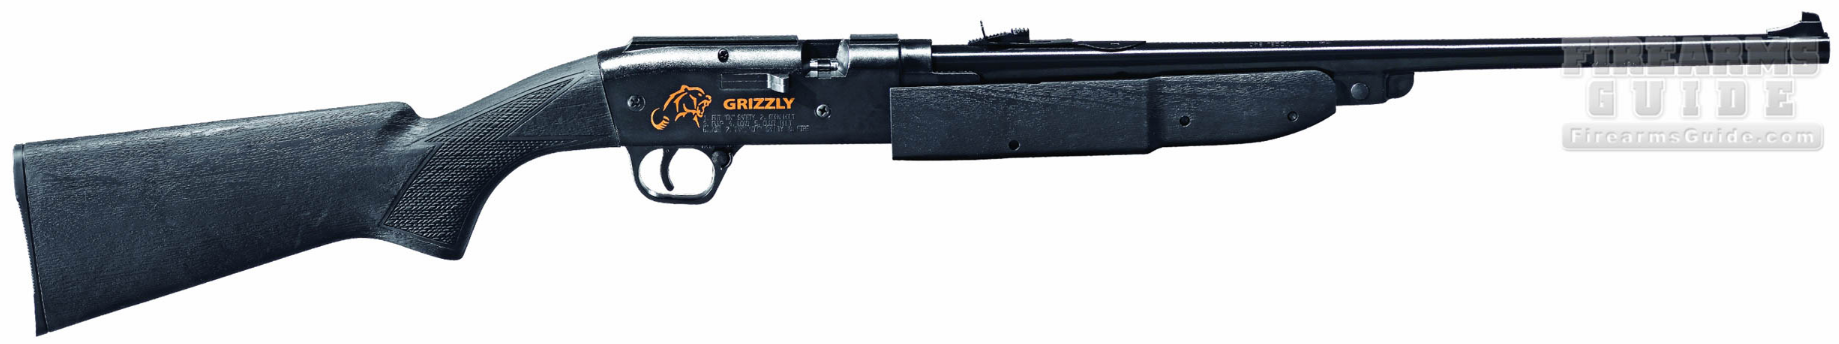 Daisy 840B Grizzly